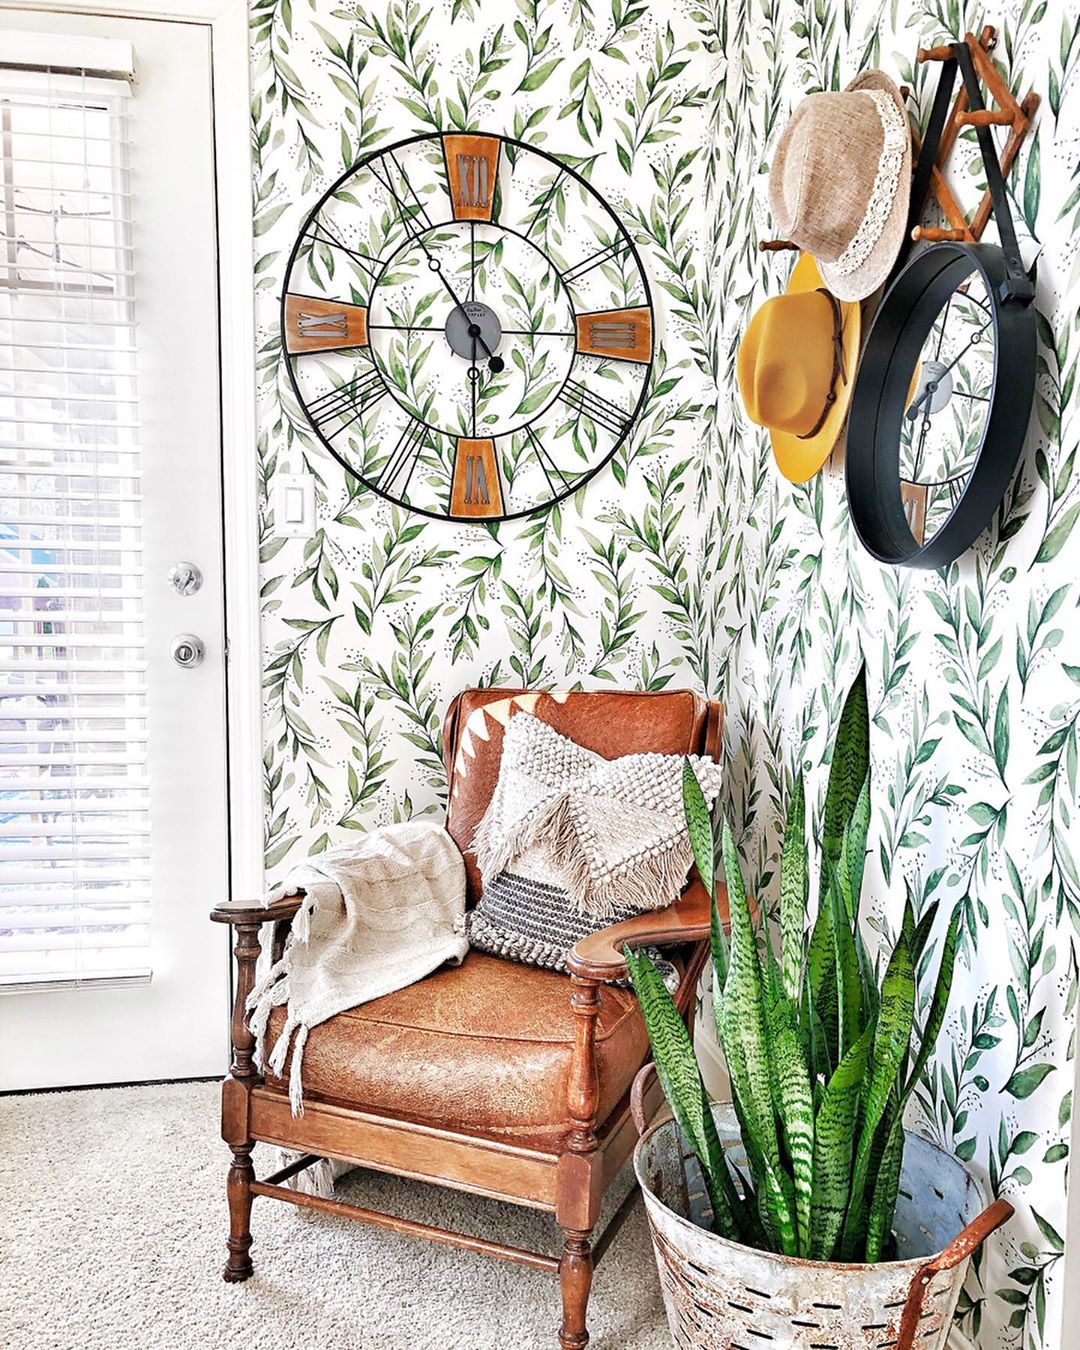 home with removeable wallpaper with olive branch pattern and leather chair in front photo by Instagram user @my_graceful_mess